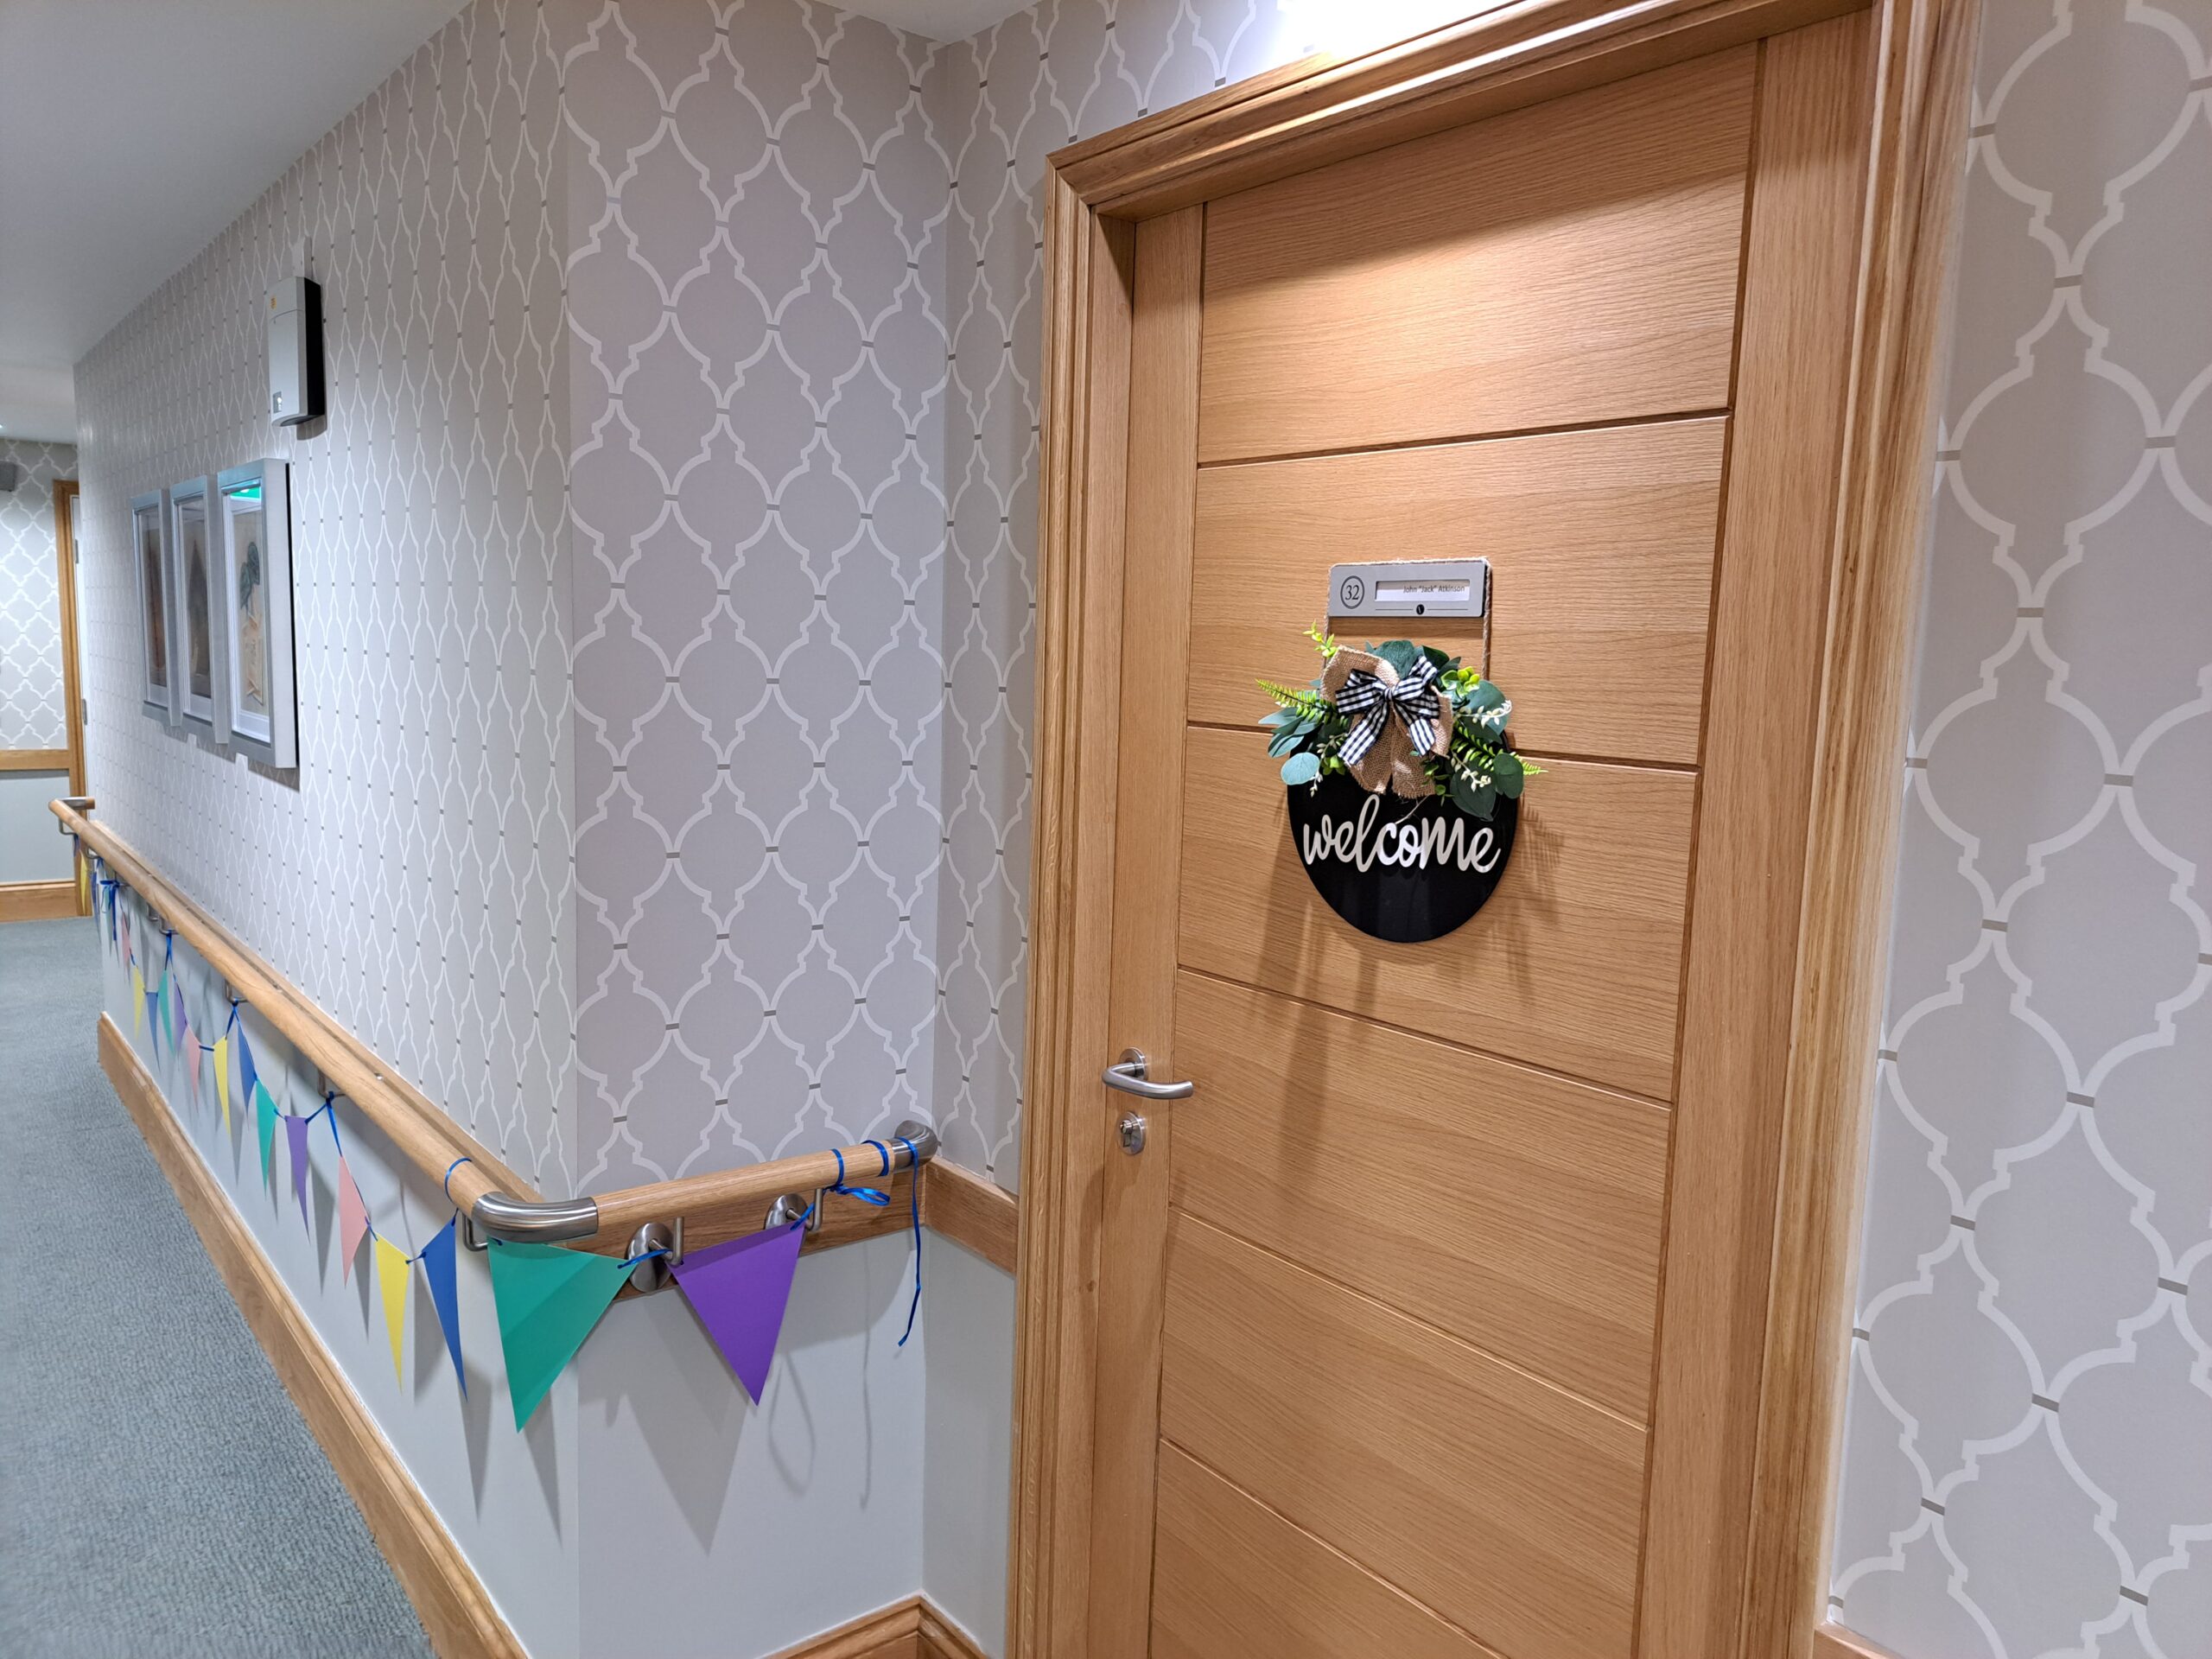 A oak door with a welcome sign and bunting on handrails.